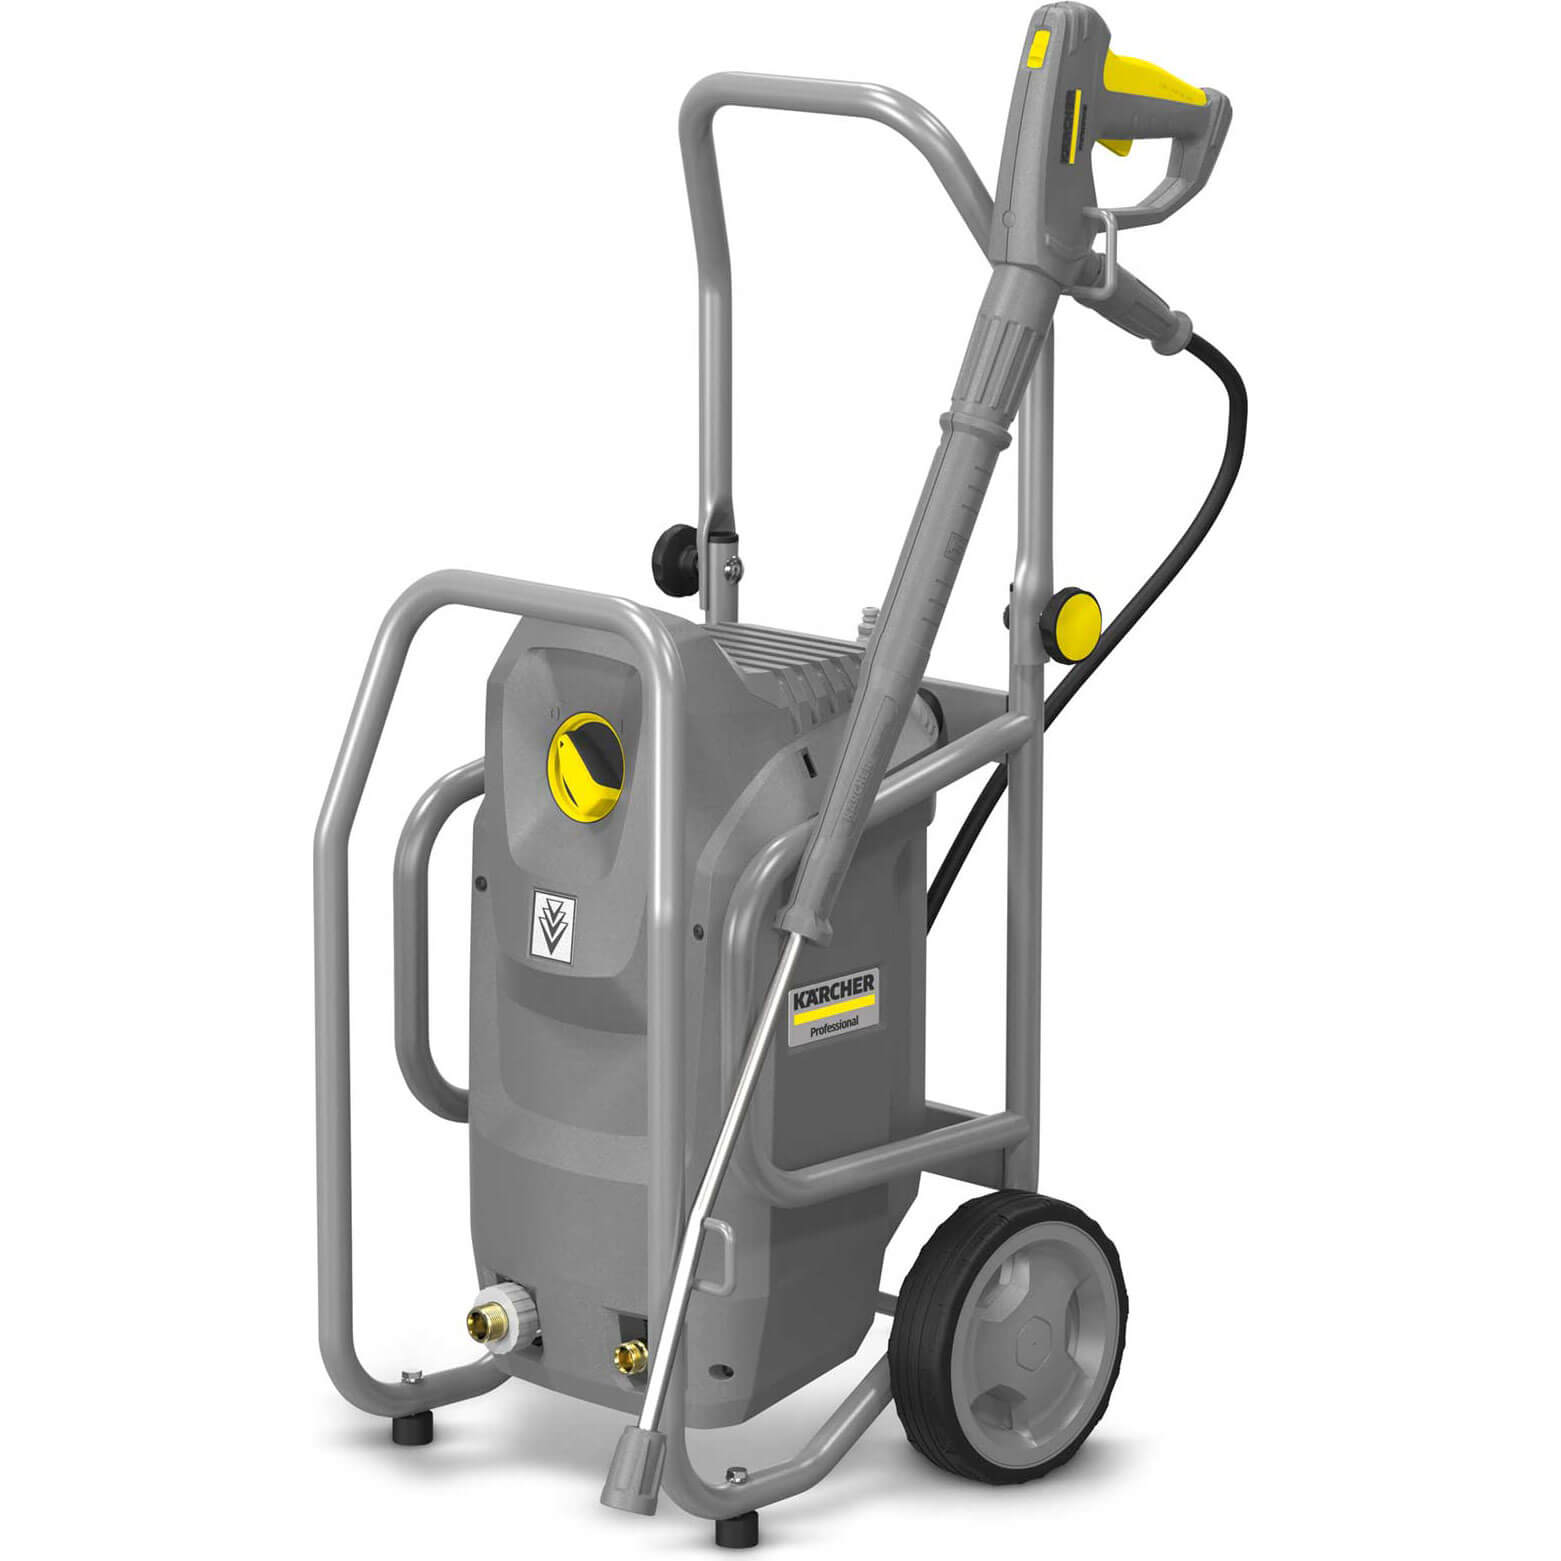 Photos - Other household chemicals Karcher HD 7/12-4 M Cage Professional Pressure Washer 180 Bar 240v 